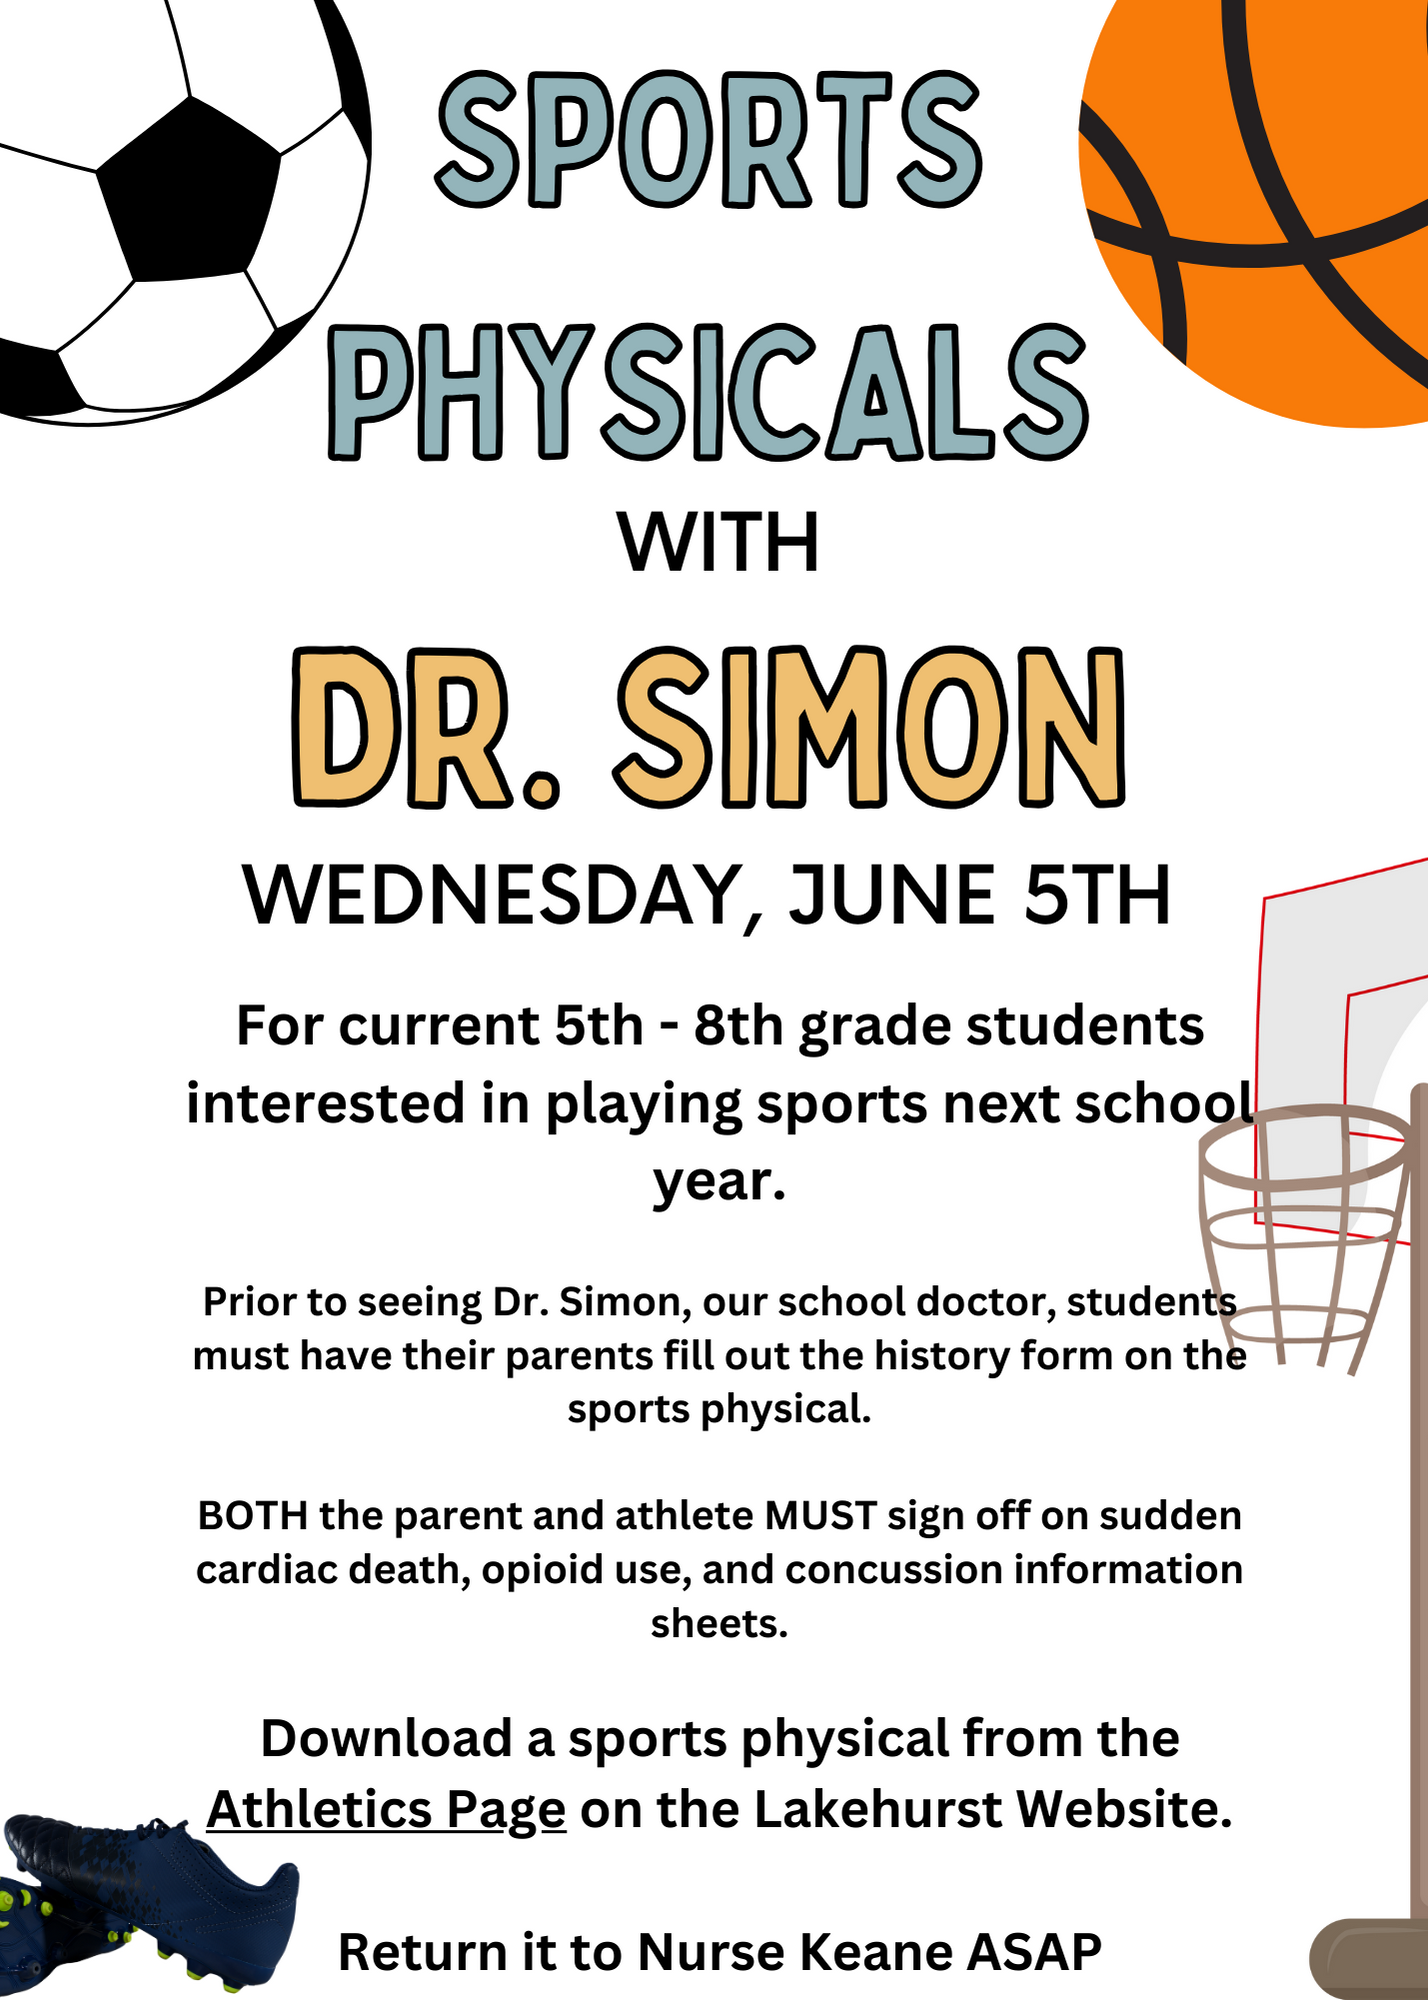 Sports Physicals with Dr. Simon